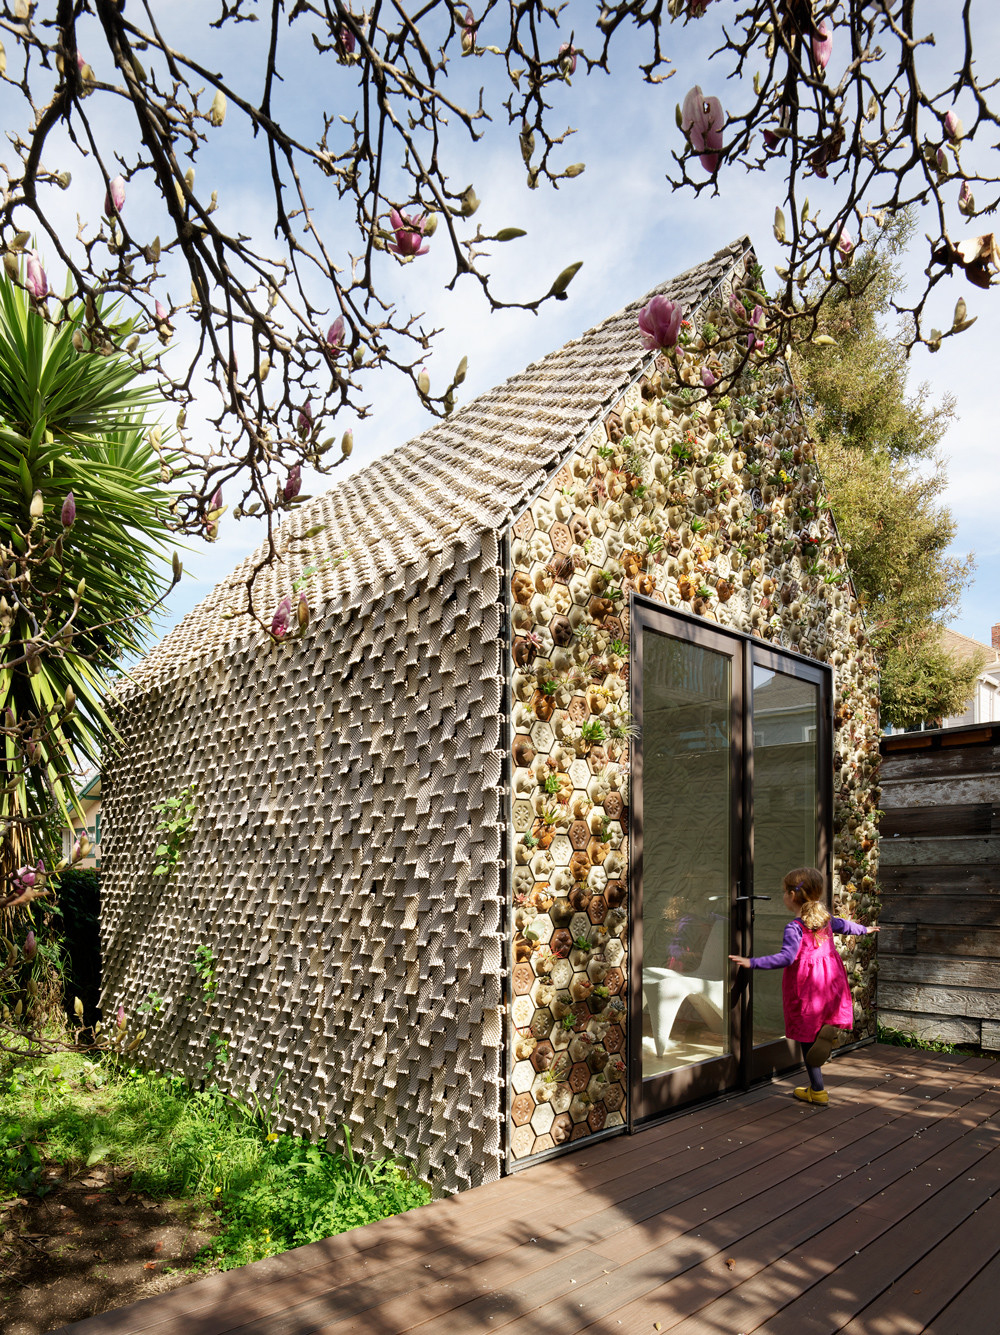 4,500 3D printed ceramic shingles clad the walls and roof of the cabin. Photo: Matthew Millman